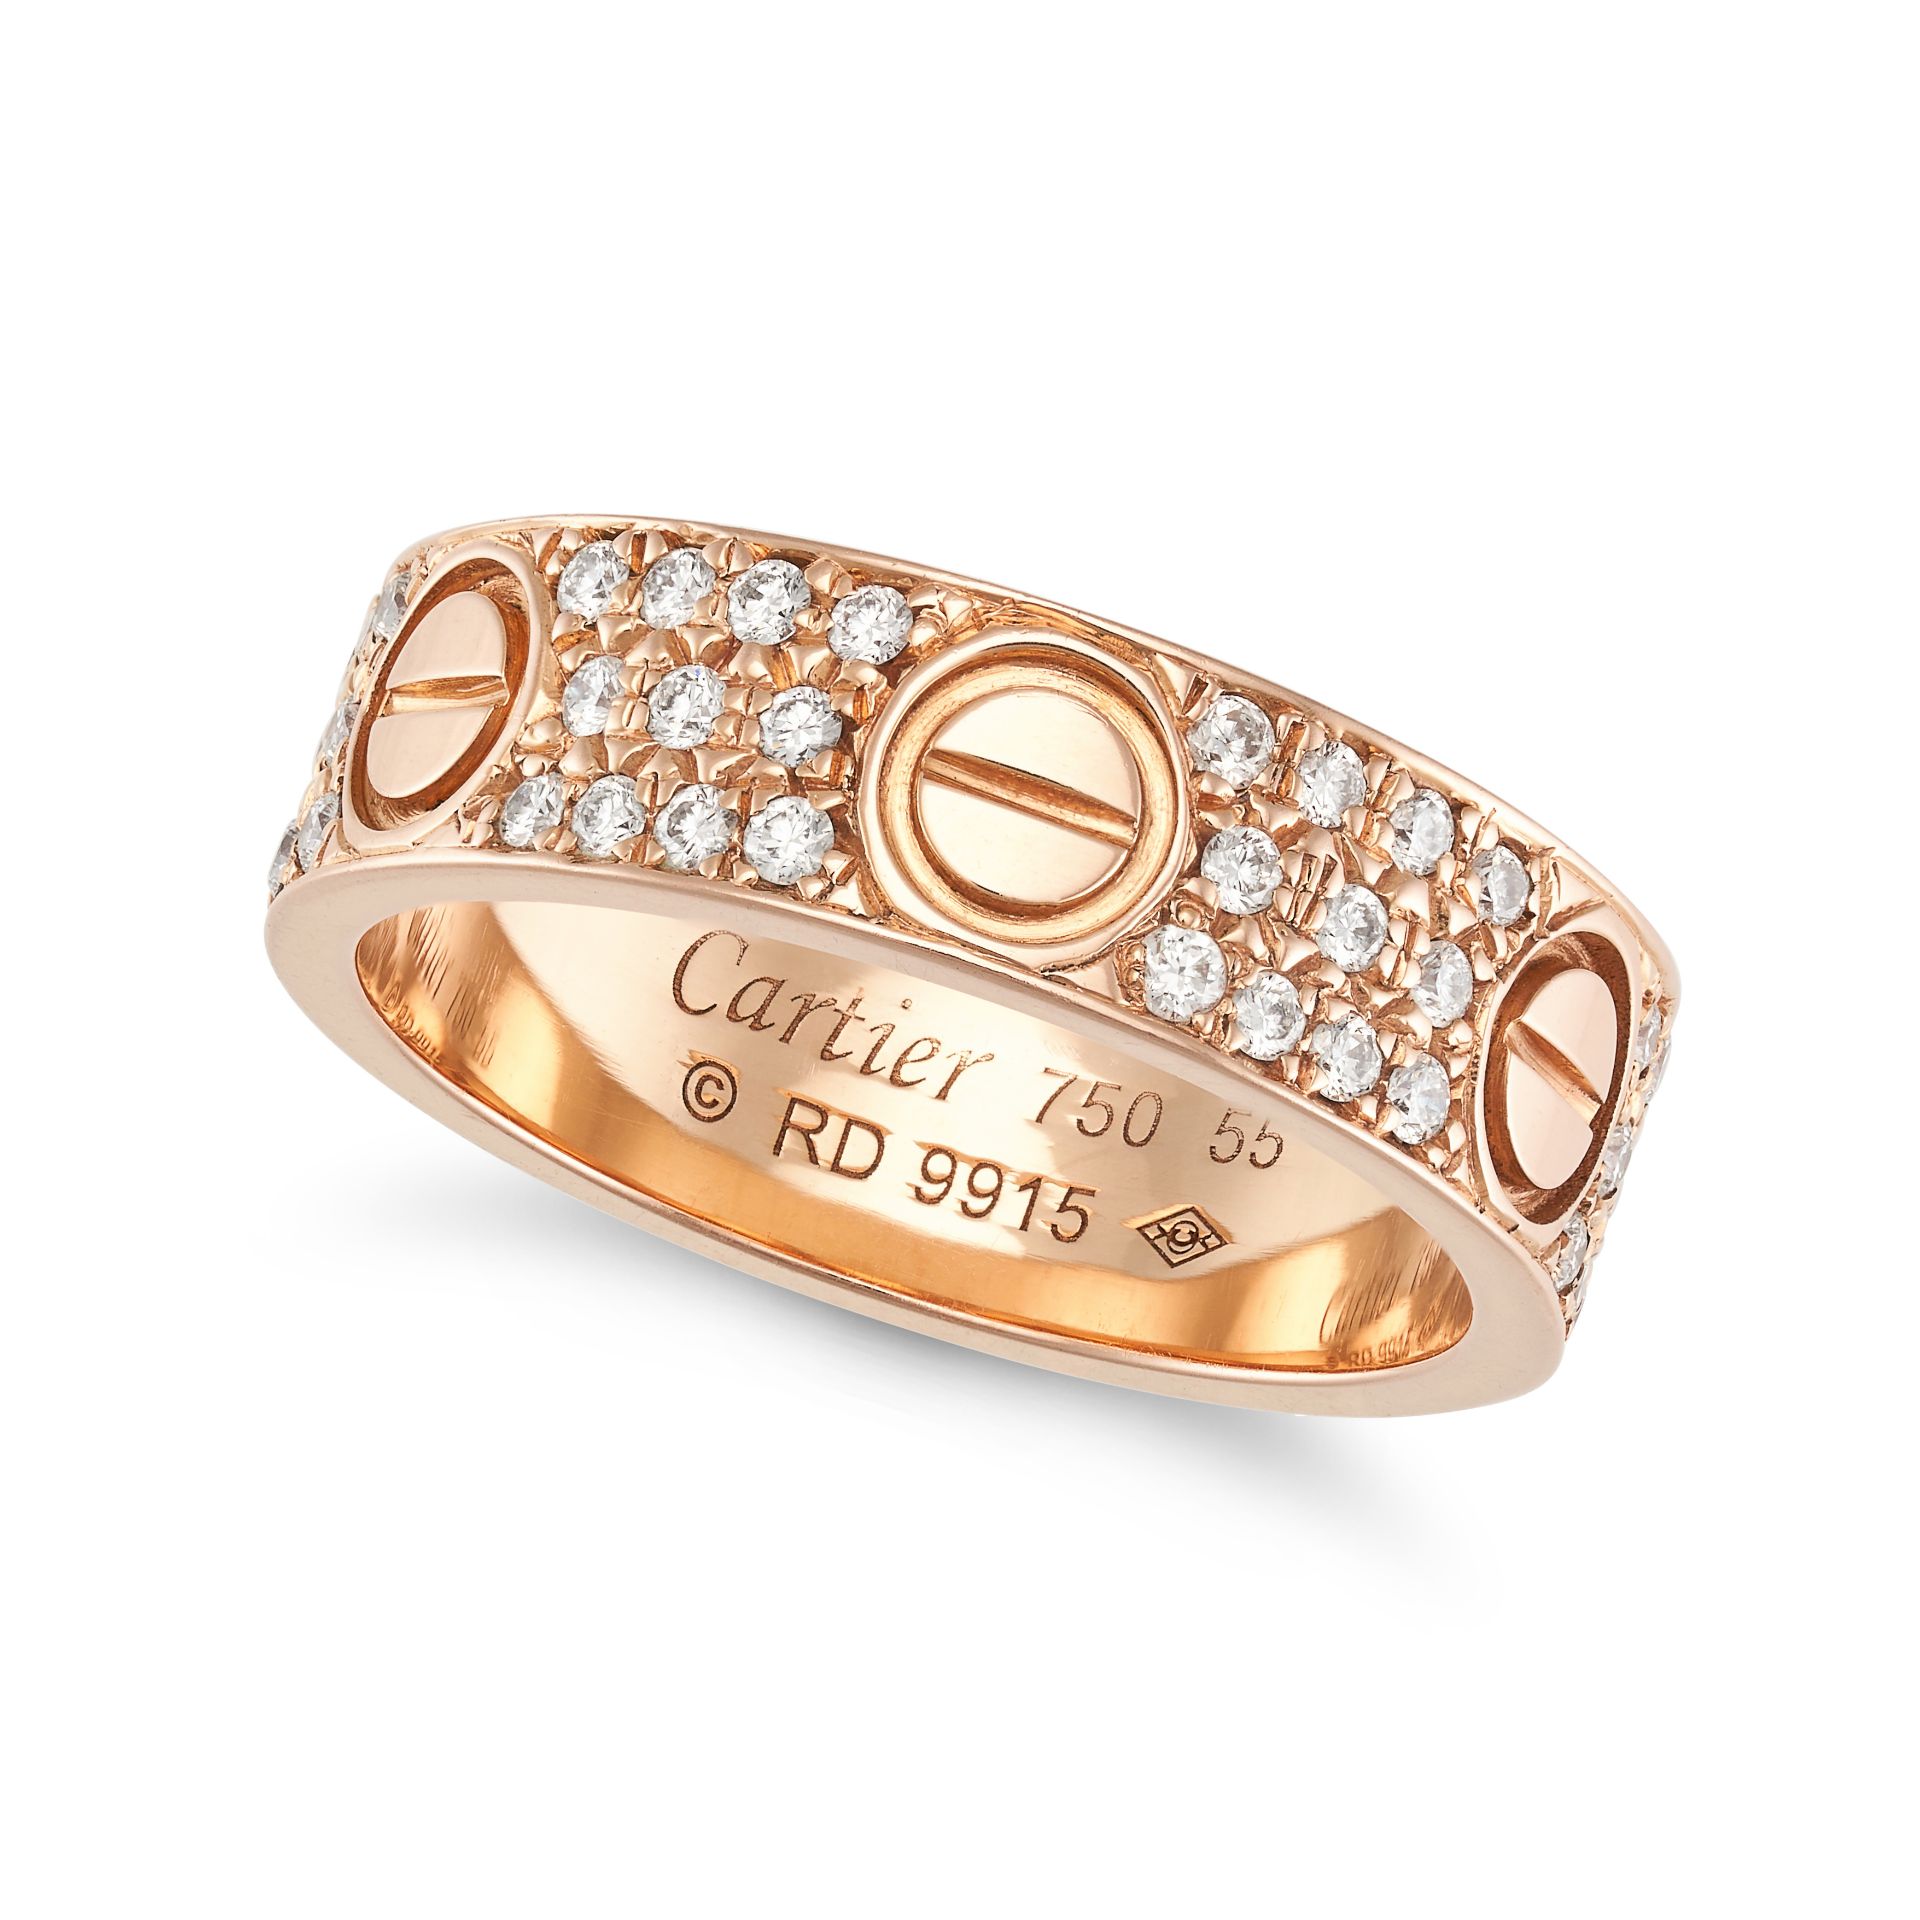 CARTIER, A DIAMOND LOVE RING in 18ct rose gold, the band pave set throughout with round brilliant...